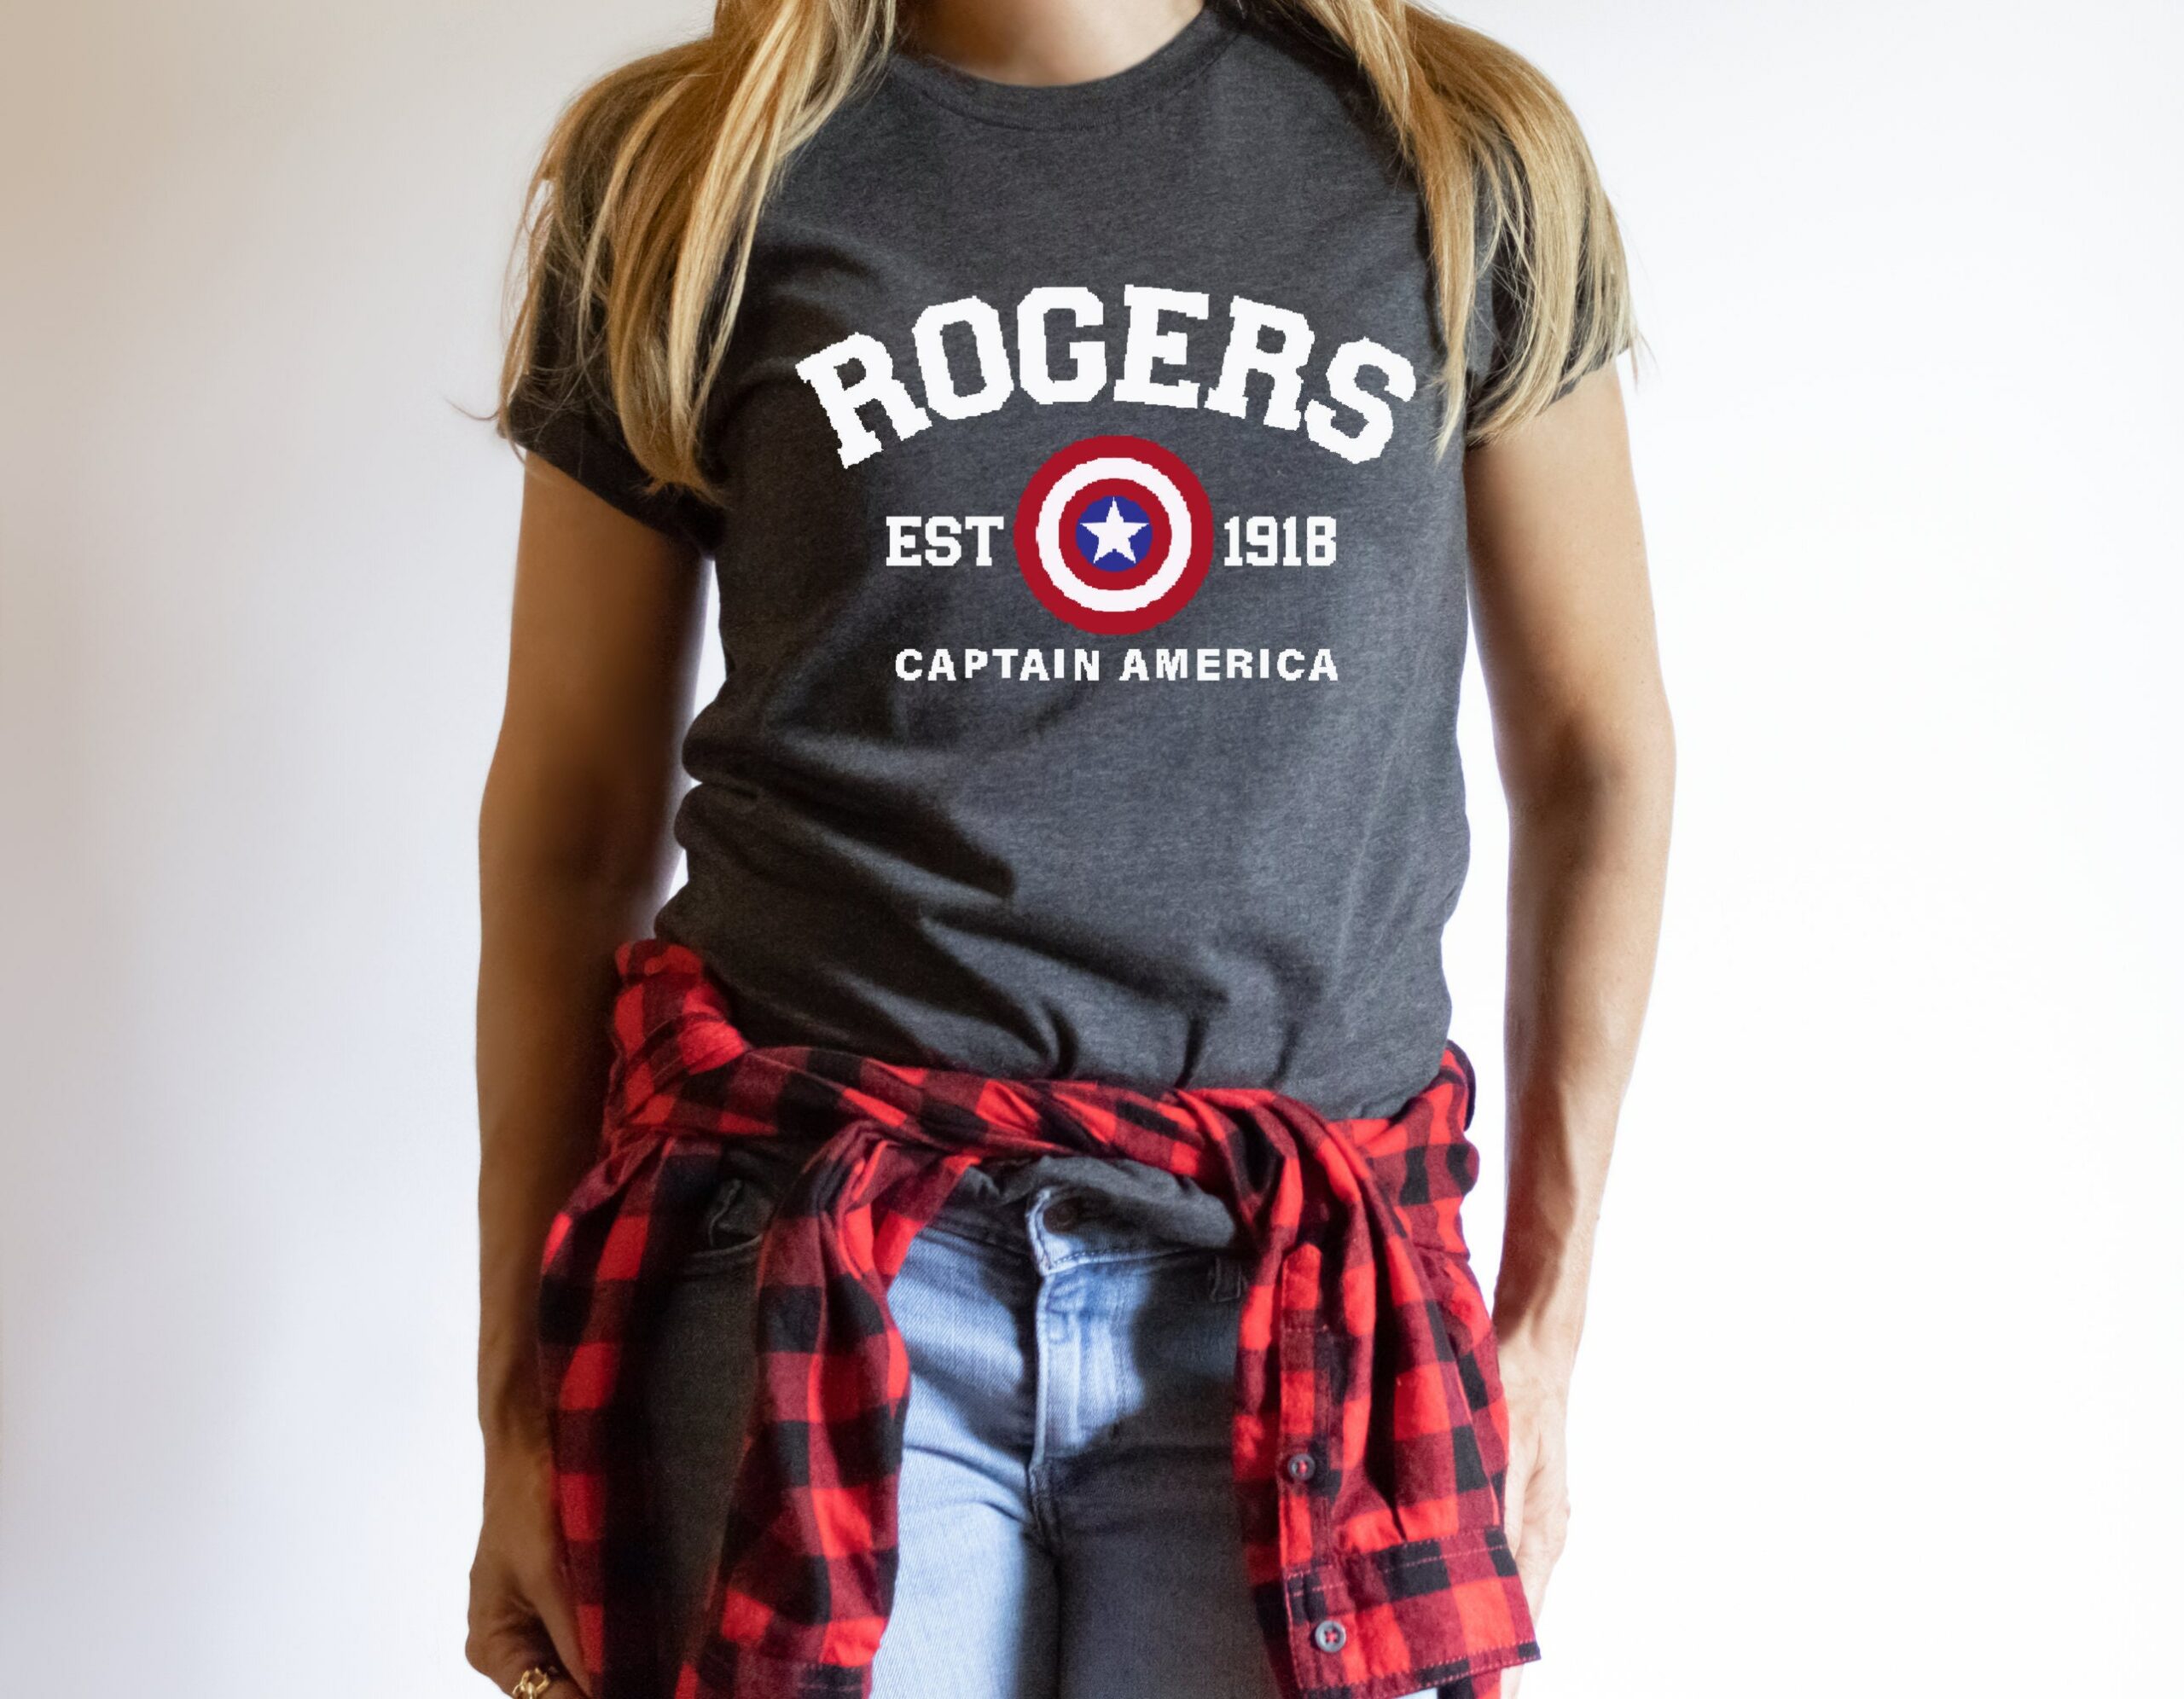 Rogers Shirt 1918 Winter Soldier